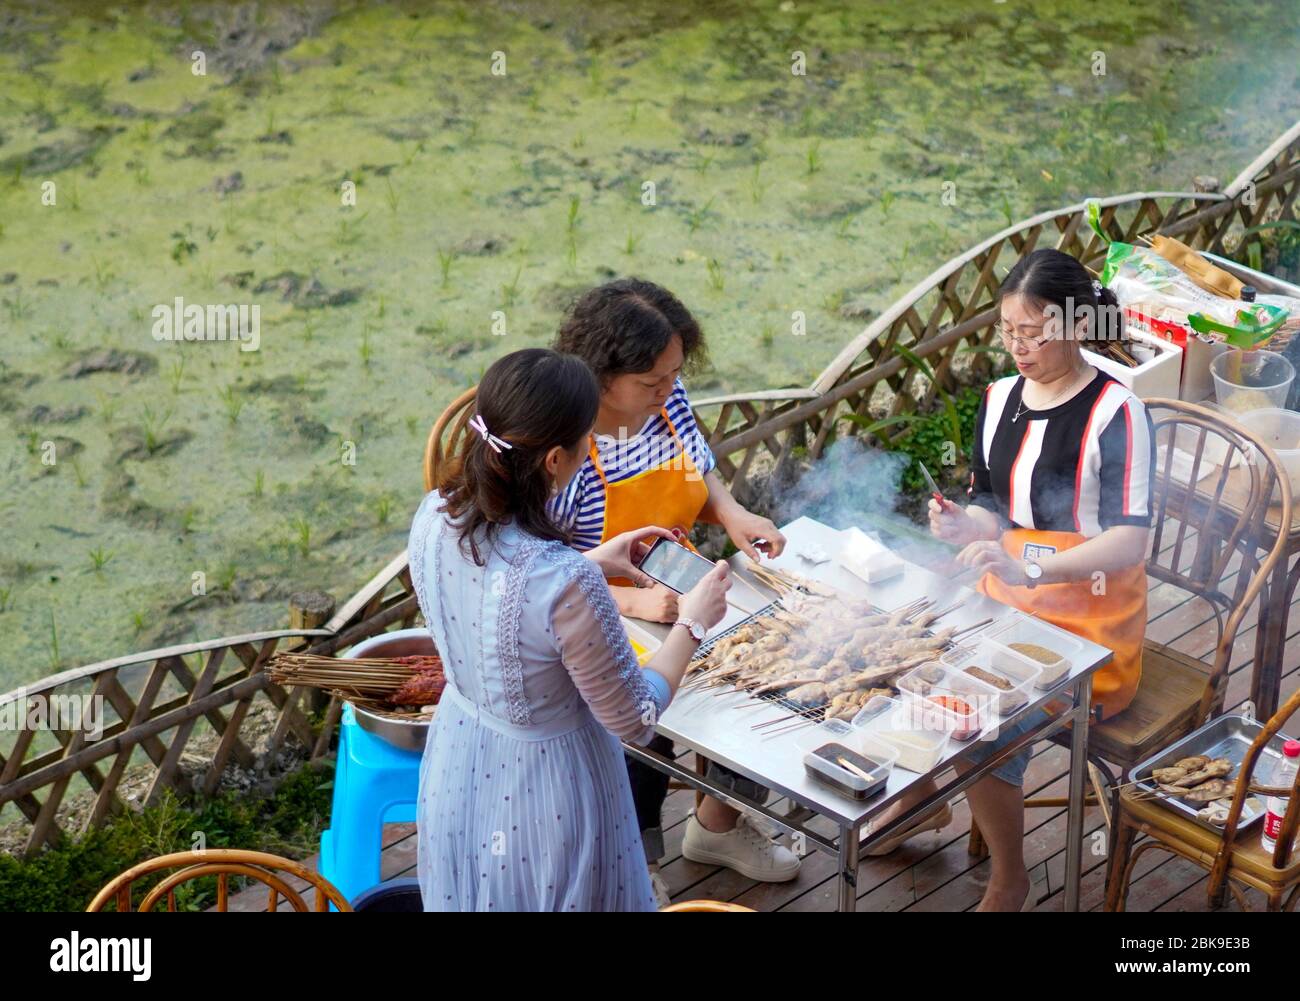 Chongqing, China's Chongqing Municipality. 2nd May, 2020. Tourists barbecue at backyard of a homestay hotel in Lieshen Village, southwest China's Chongqing Municipality, May 2, 2020. Located deep in mountains, Lieshen Village has made great efforts on developing rural tourism in recent years, as a way to boost local people's income. With the help of local authorities, villagers turn farmhouses into homestay hotels and make rural landscape as scenic spots attract tourists. Credit: Liu Chan/Xinhua/Alamy Live News Stock Photo